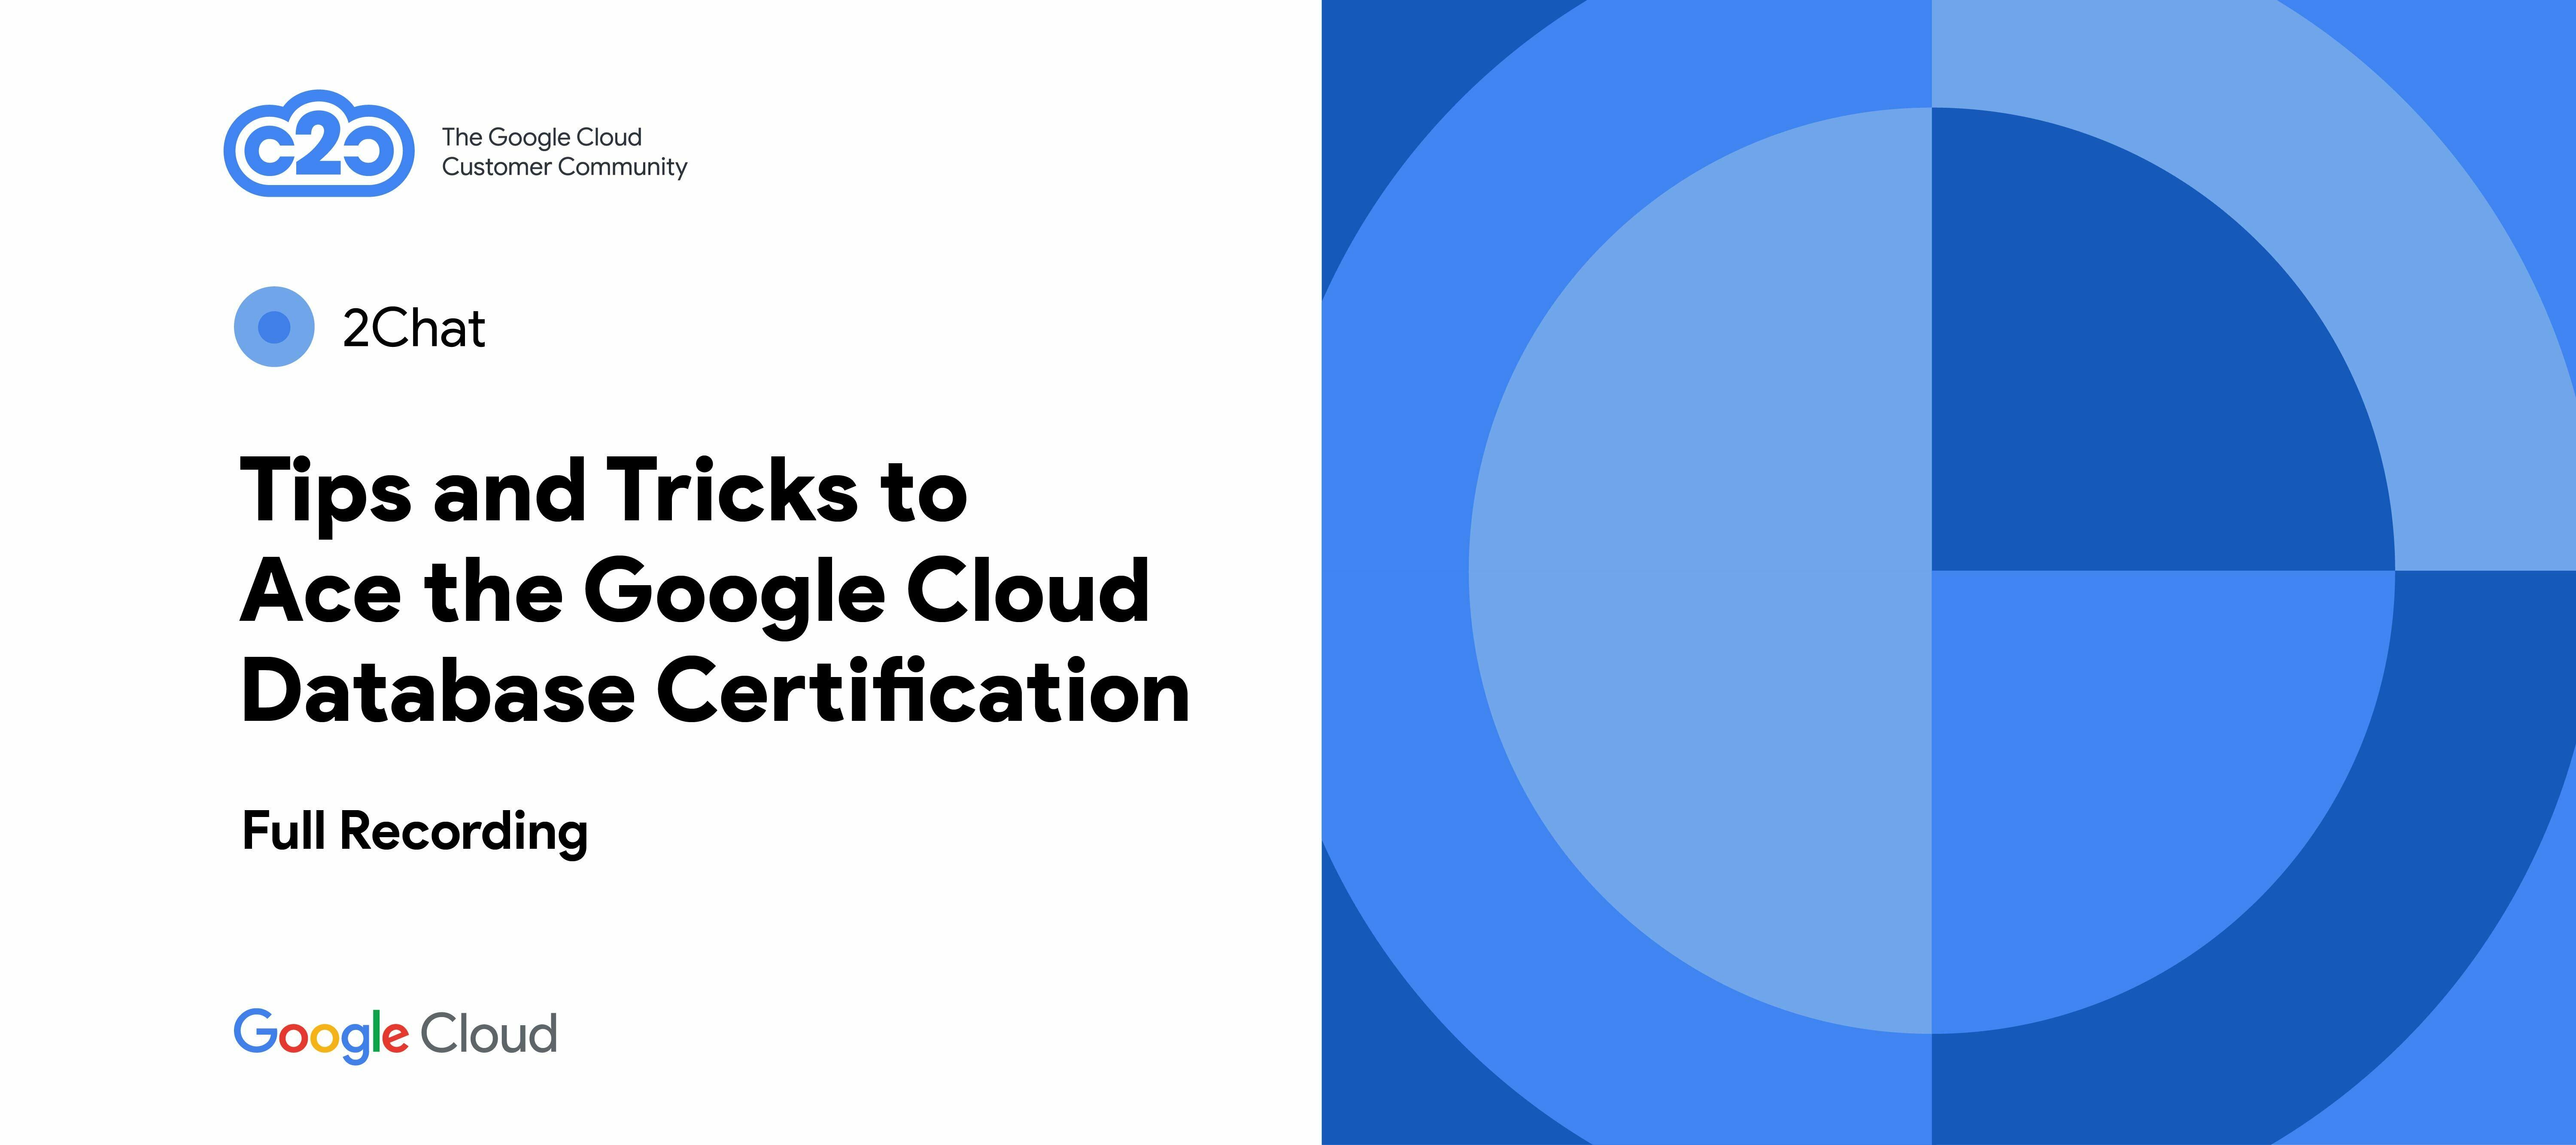 Tips and Tricks to Ace the Google Cloud Database Certification (full recording)